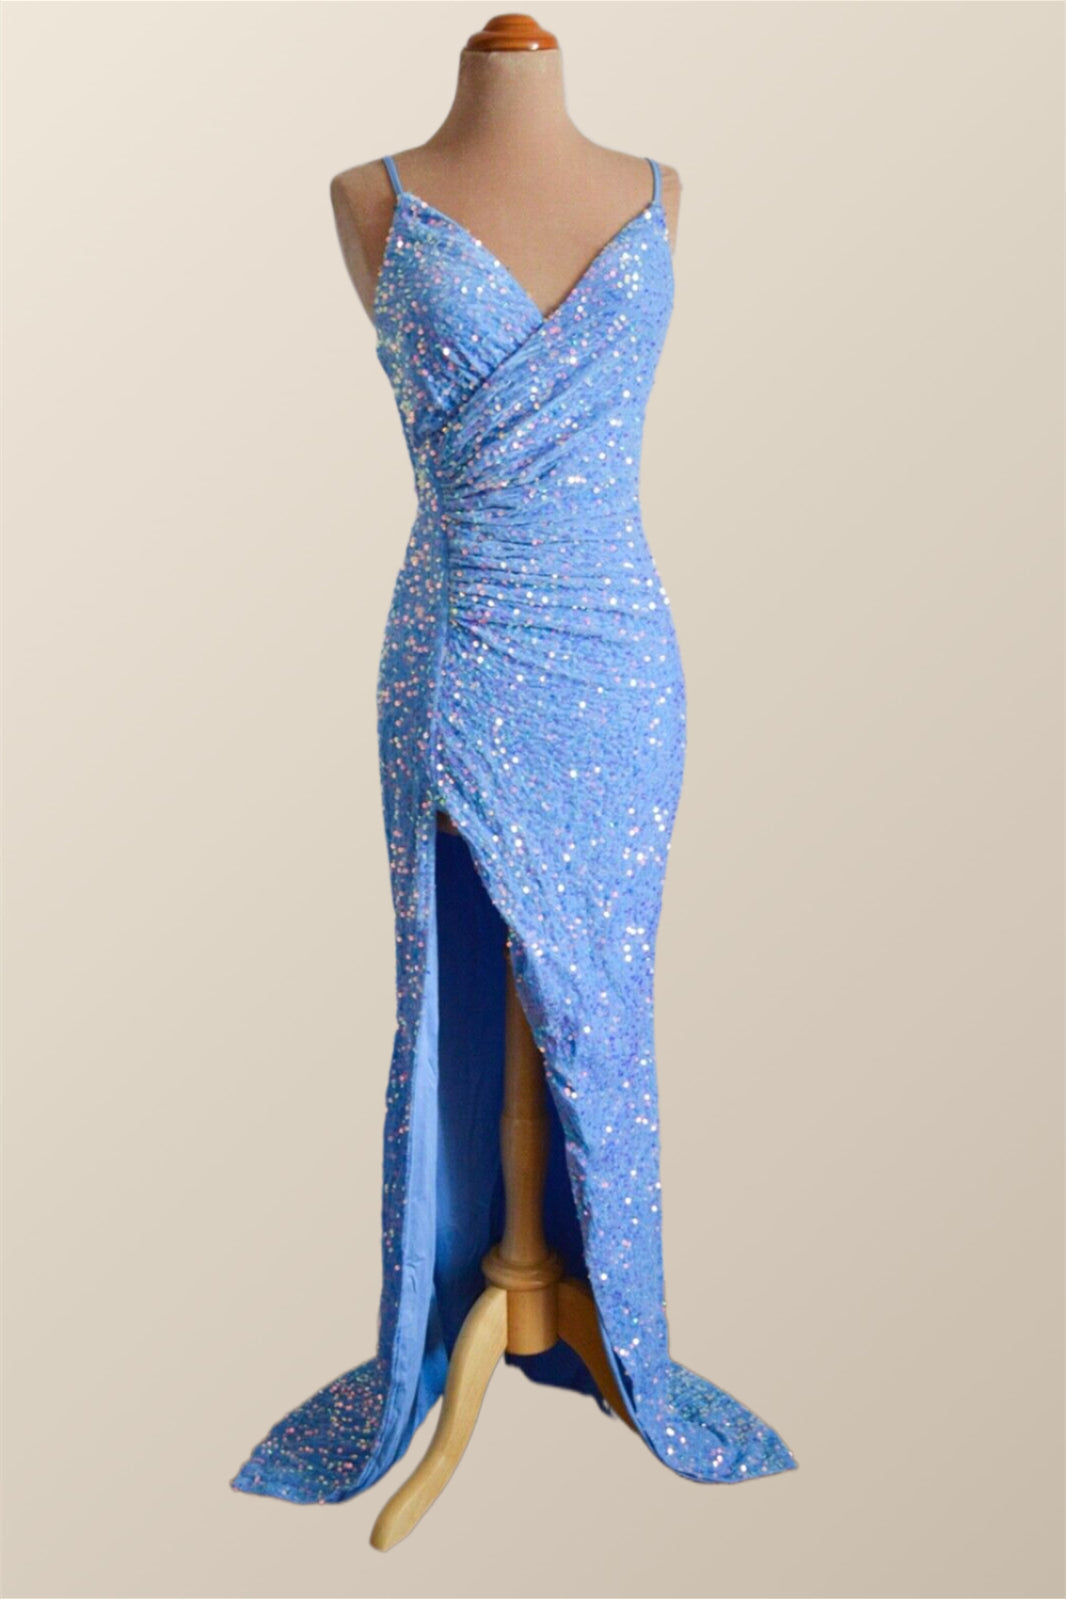 Prom Dress 3 24 Sleeves, Straps Blue Sequin Ruched Faux Wrap Dress